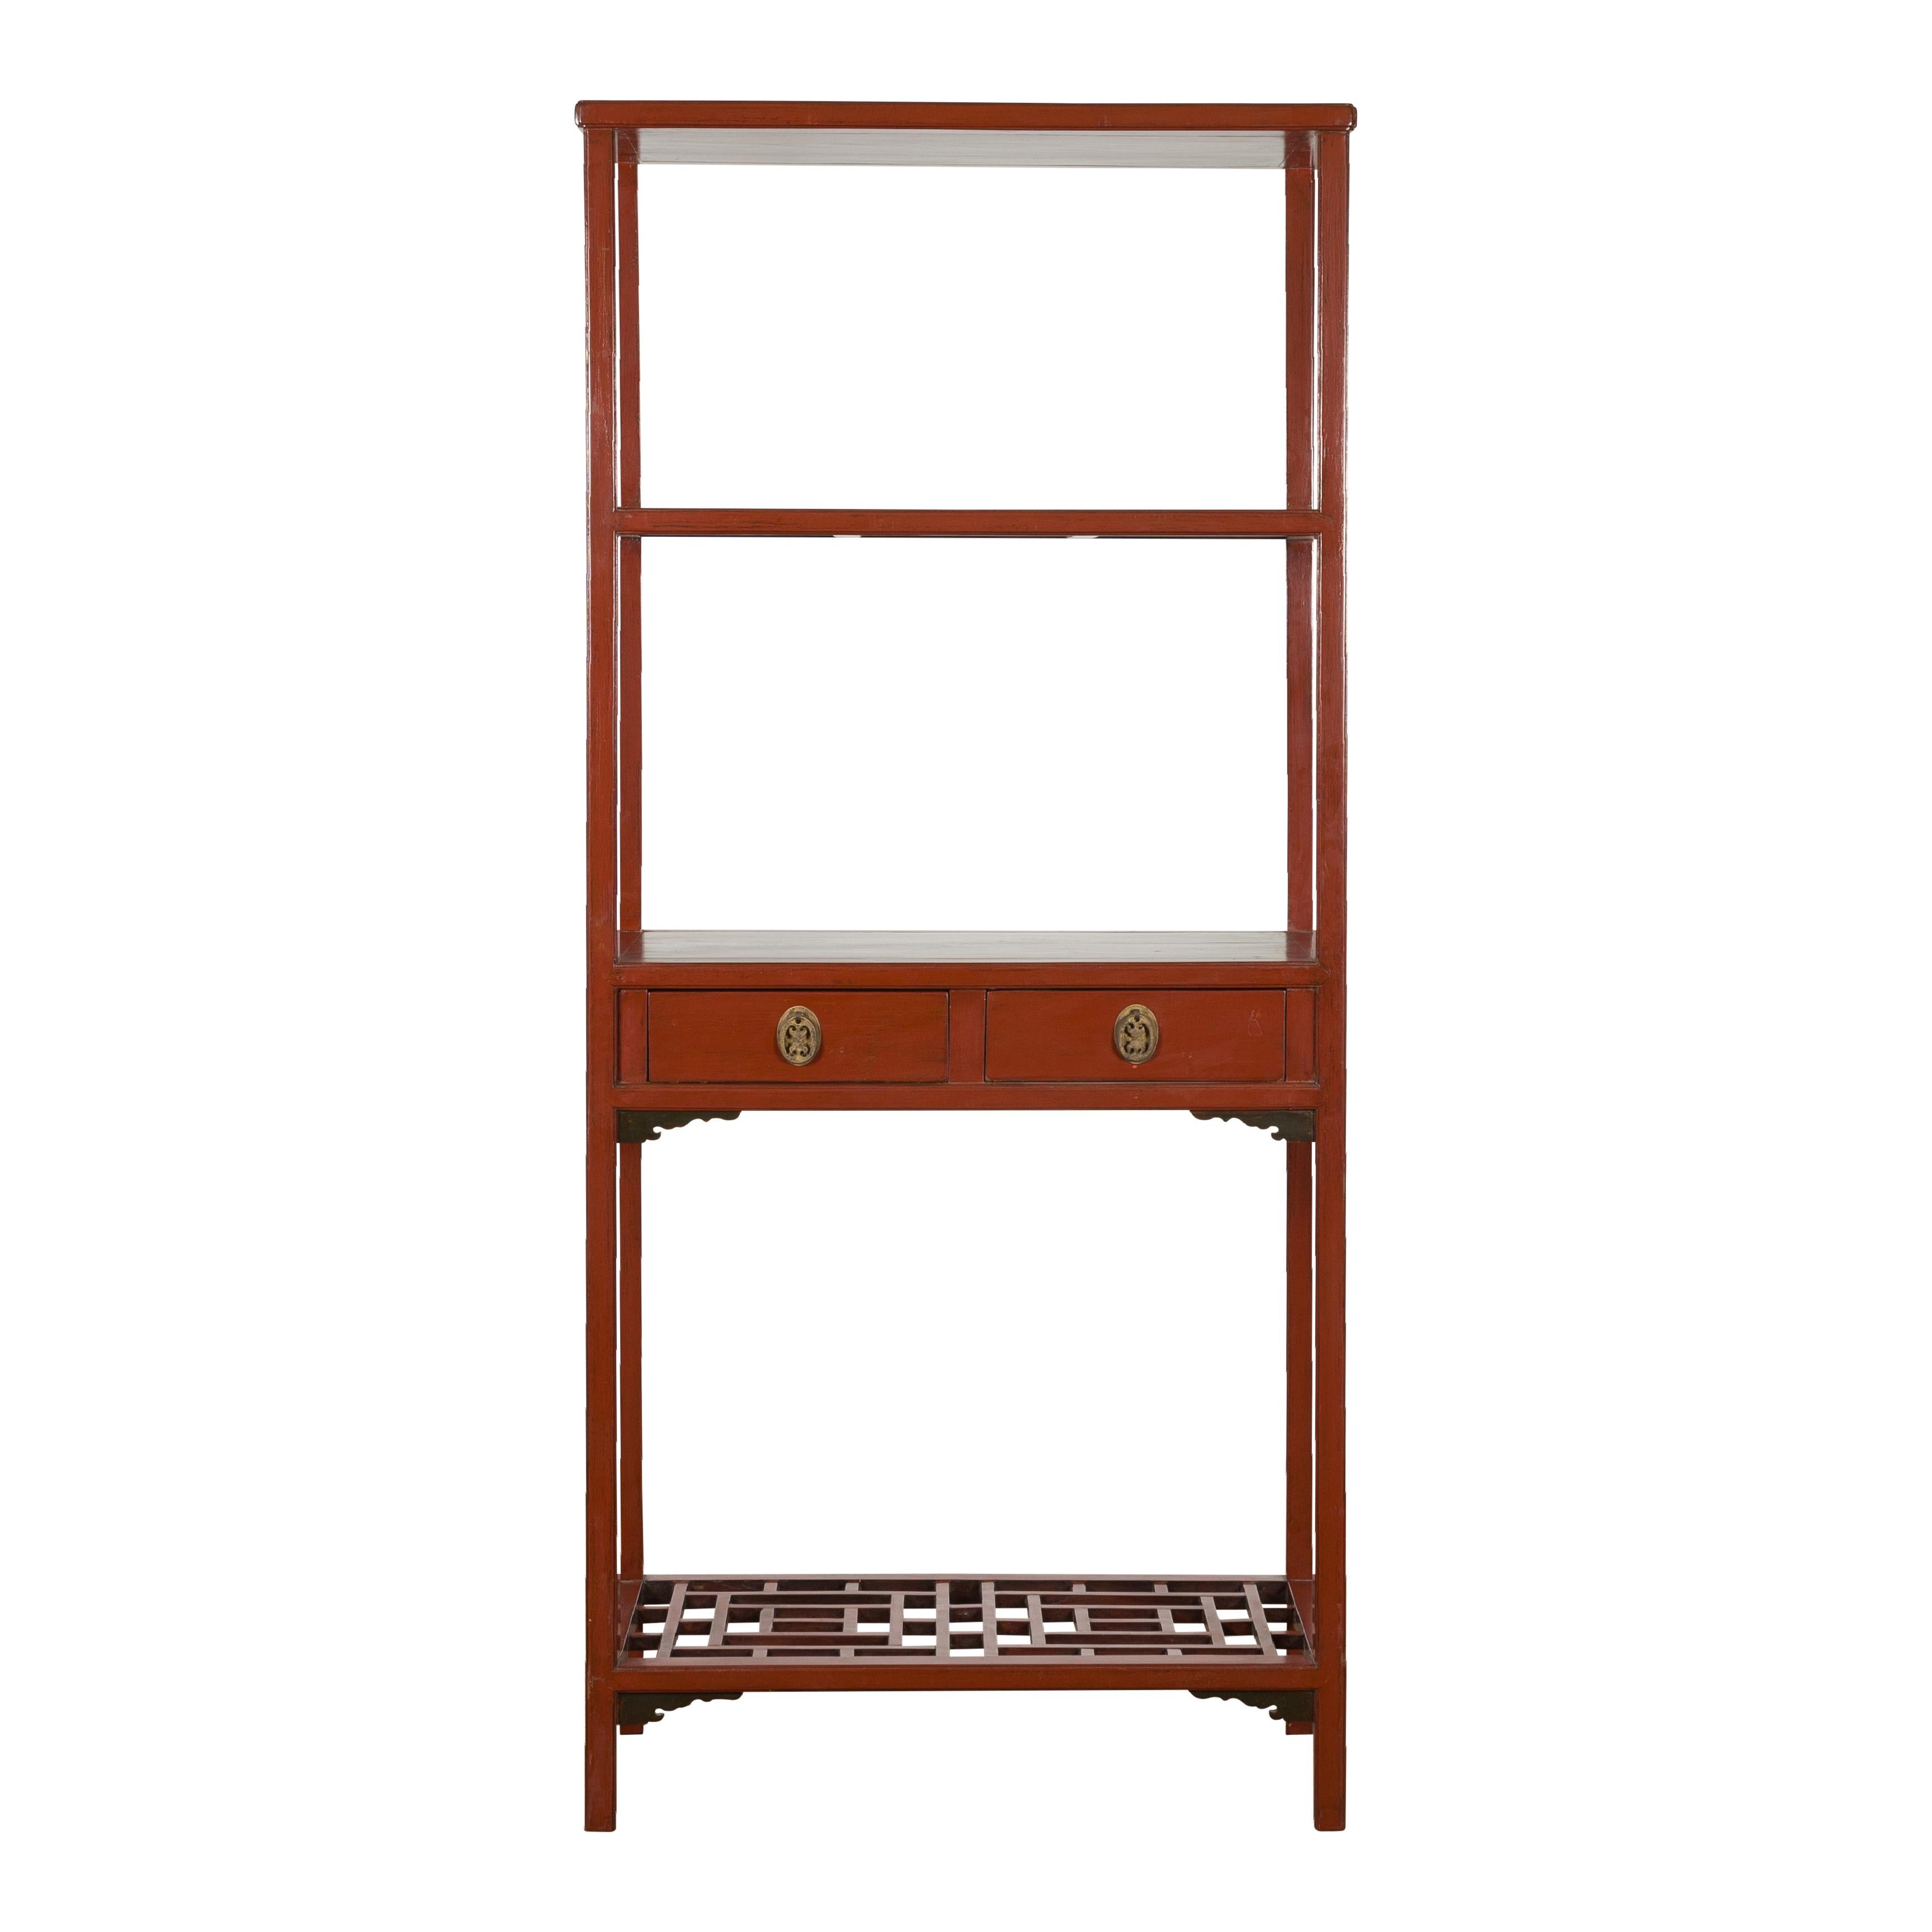 A Chinese late Qing Dynasty period red lacquer open bookshelf from the early 20th century, with two drawers, carved spandrels and geometric fretwork shelf. Created in China during the late Qing Dynasty period in the early years of the 20th century,